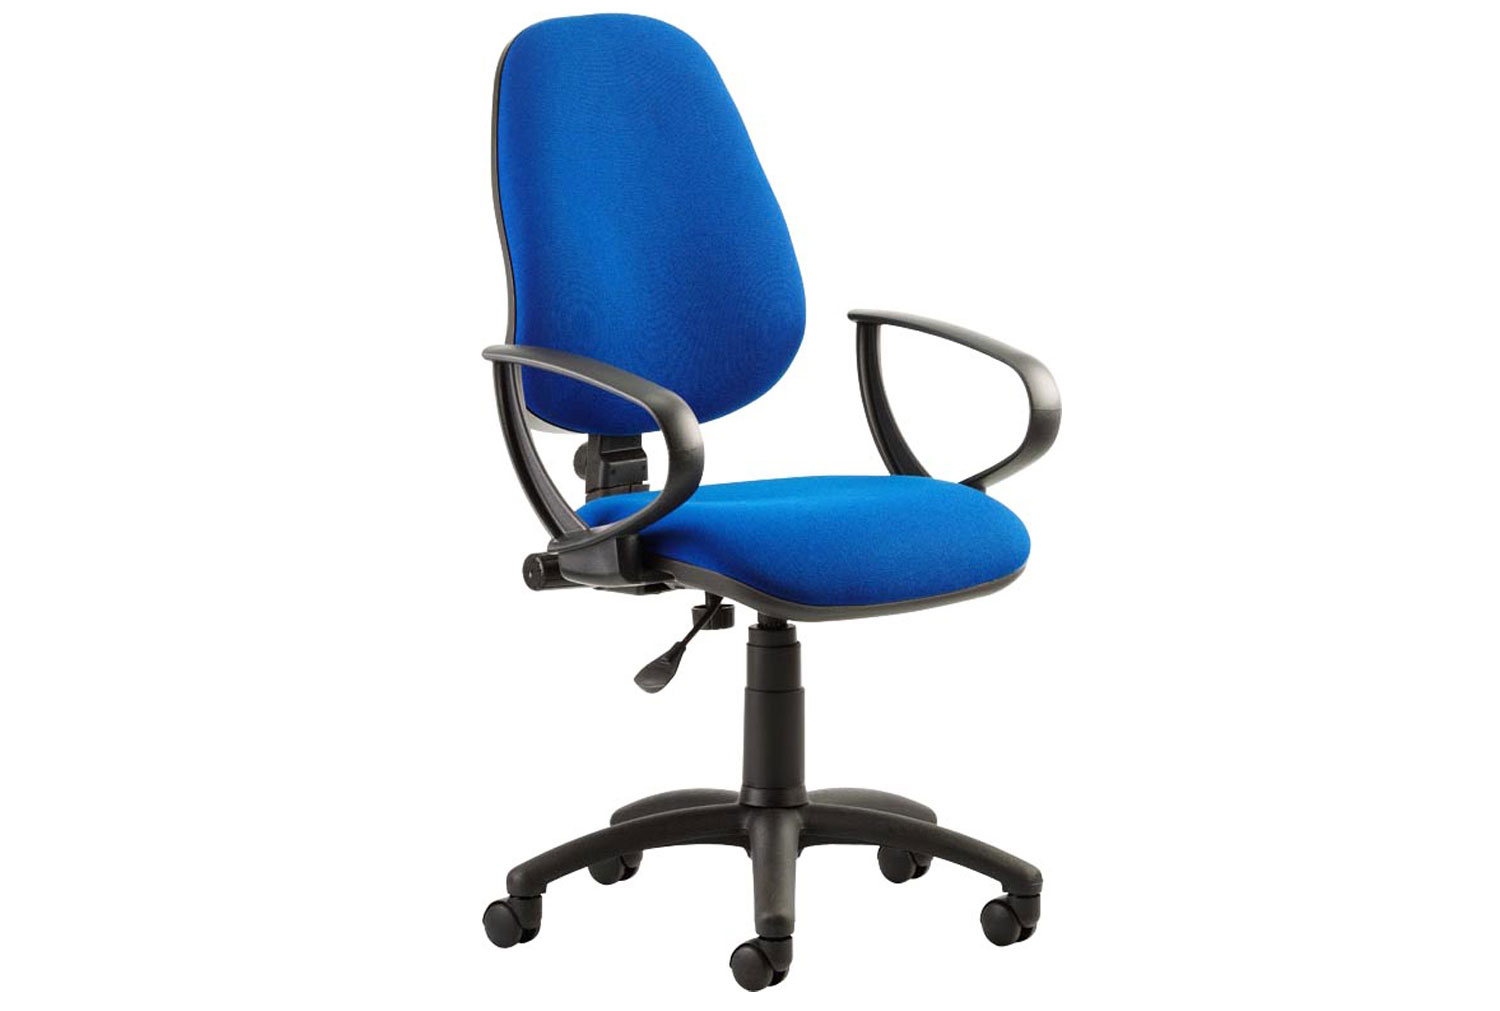 Lunar 1 Lever Operator Office Chair With Fixed Arms, Blue, Fully Installed